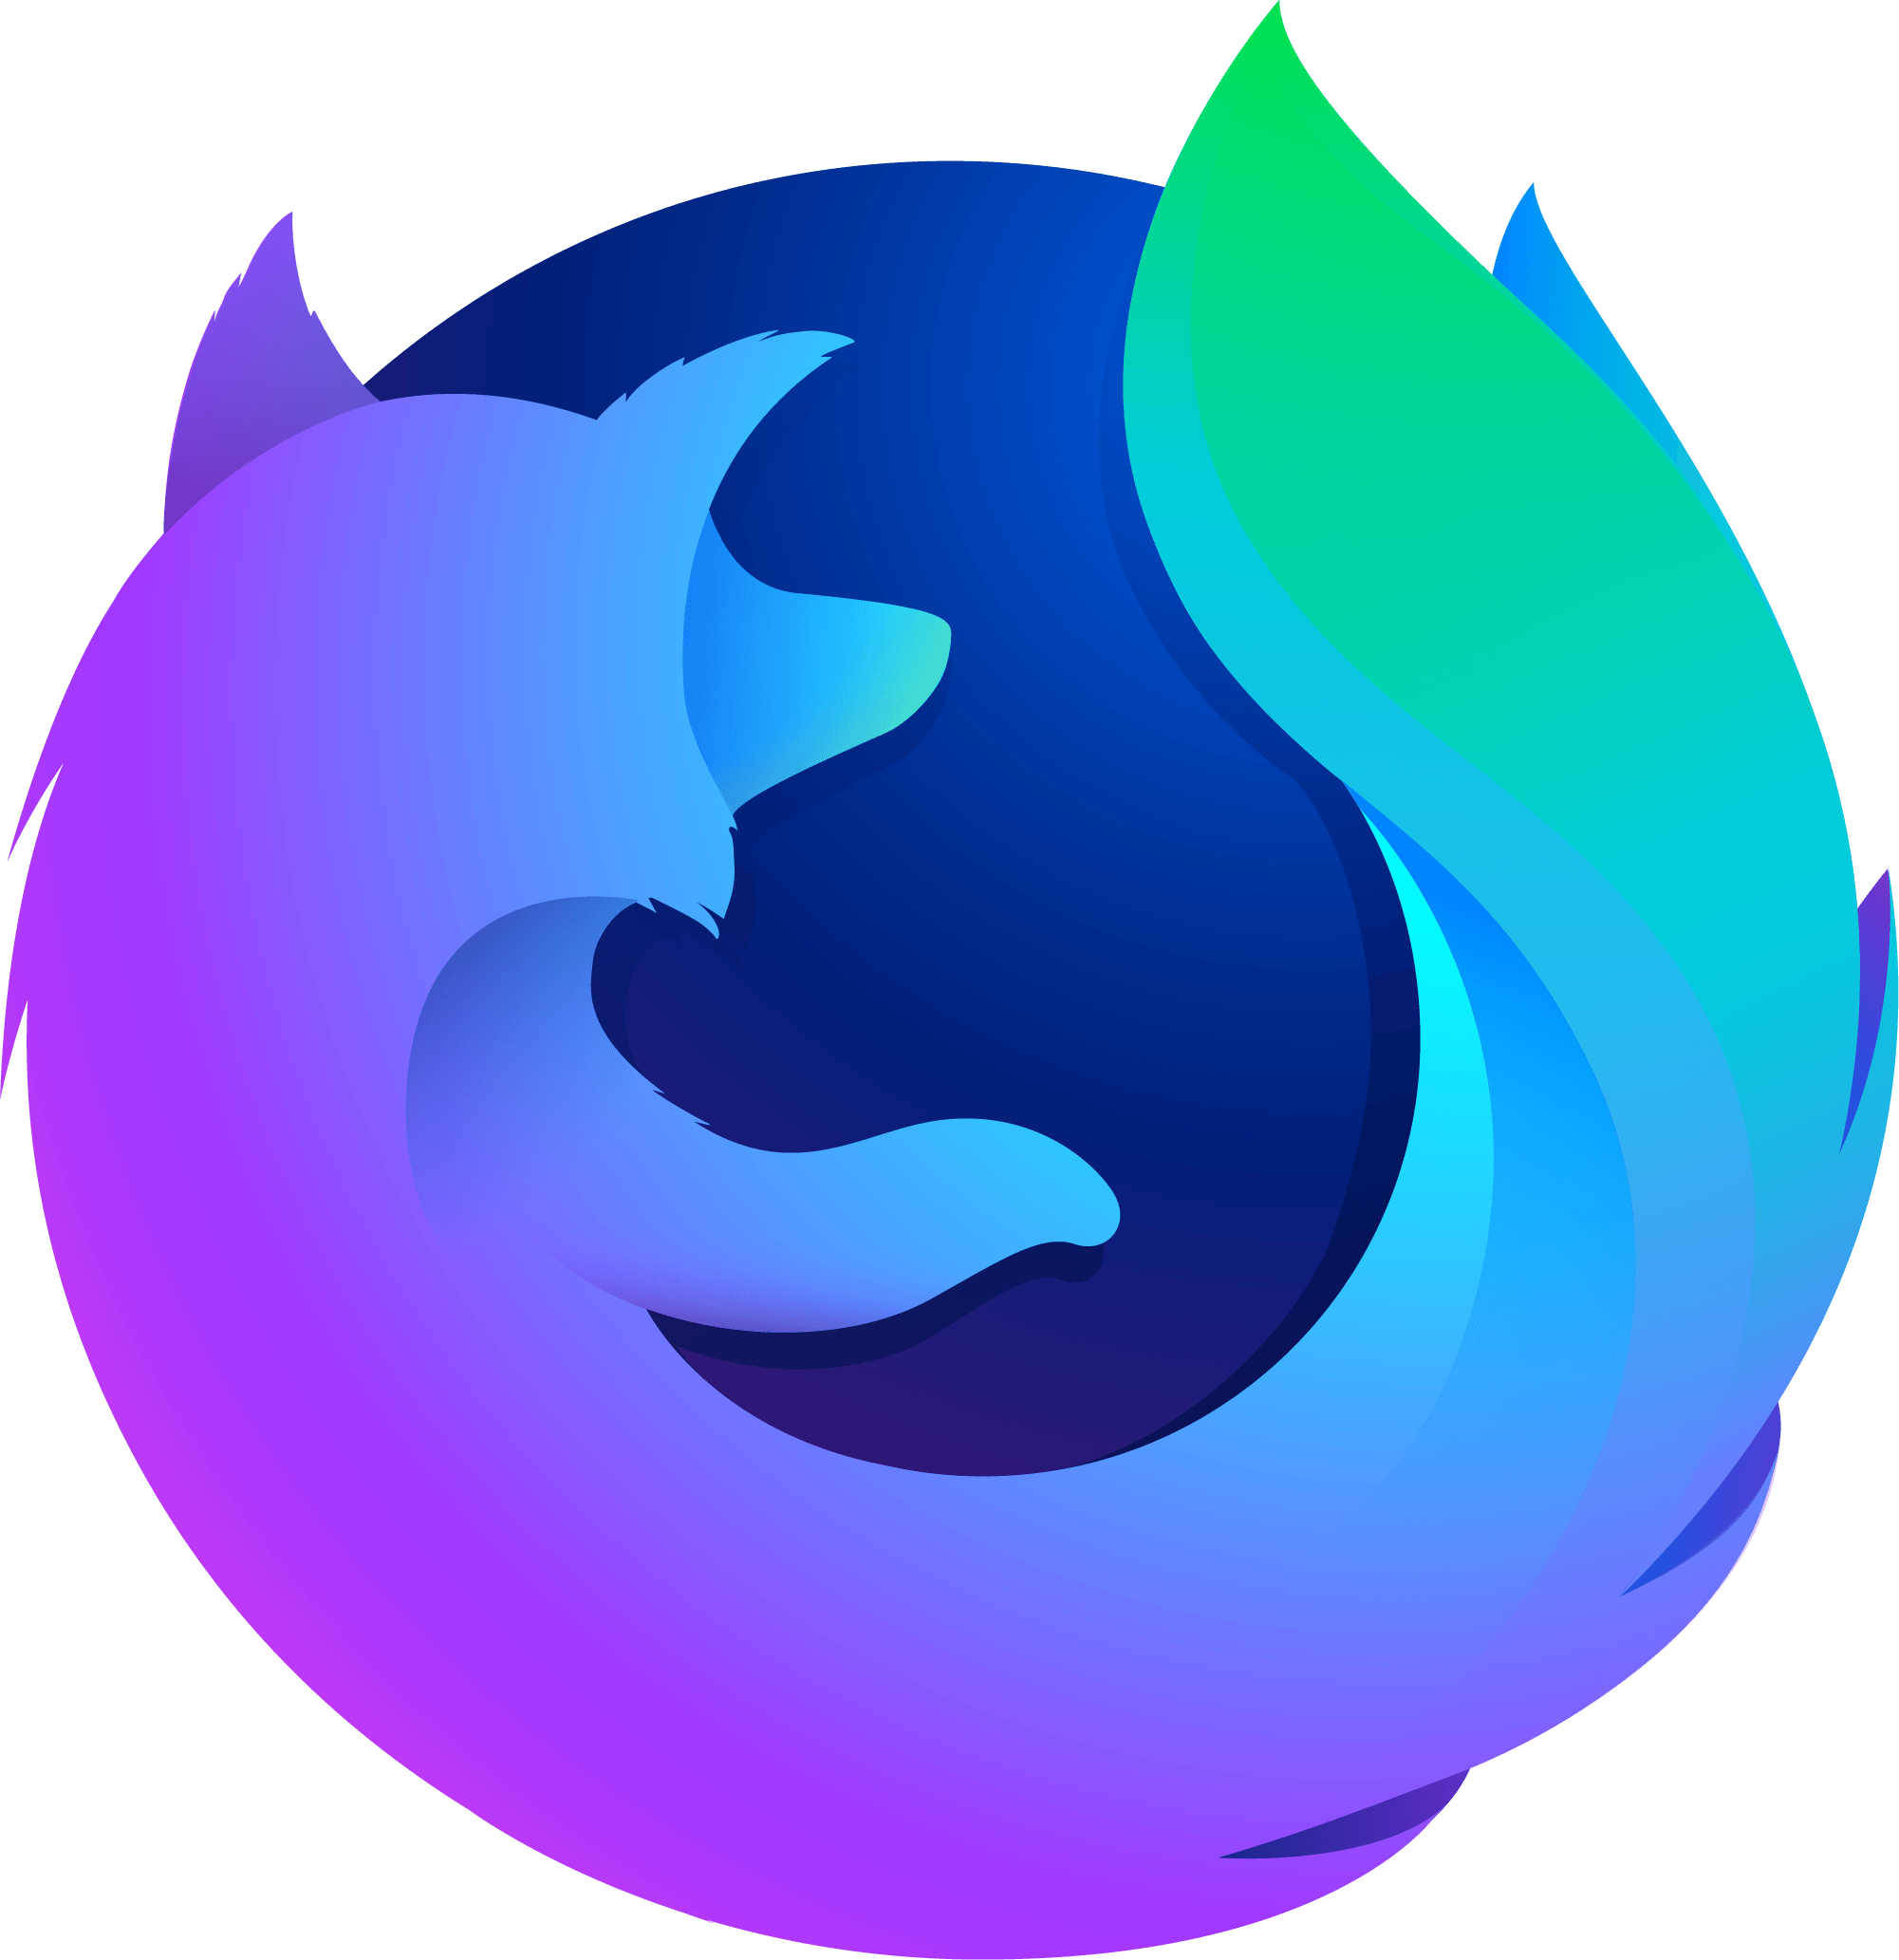 mozilla firefox old version free download